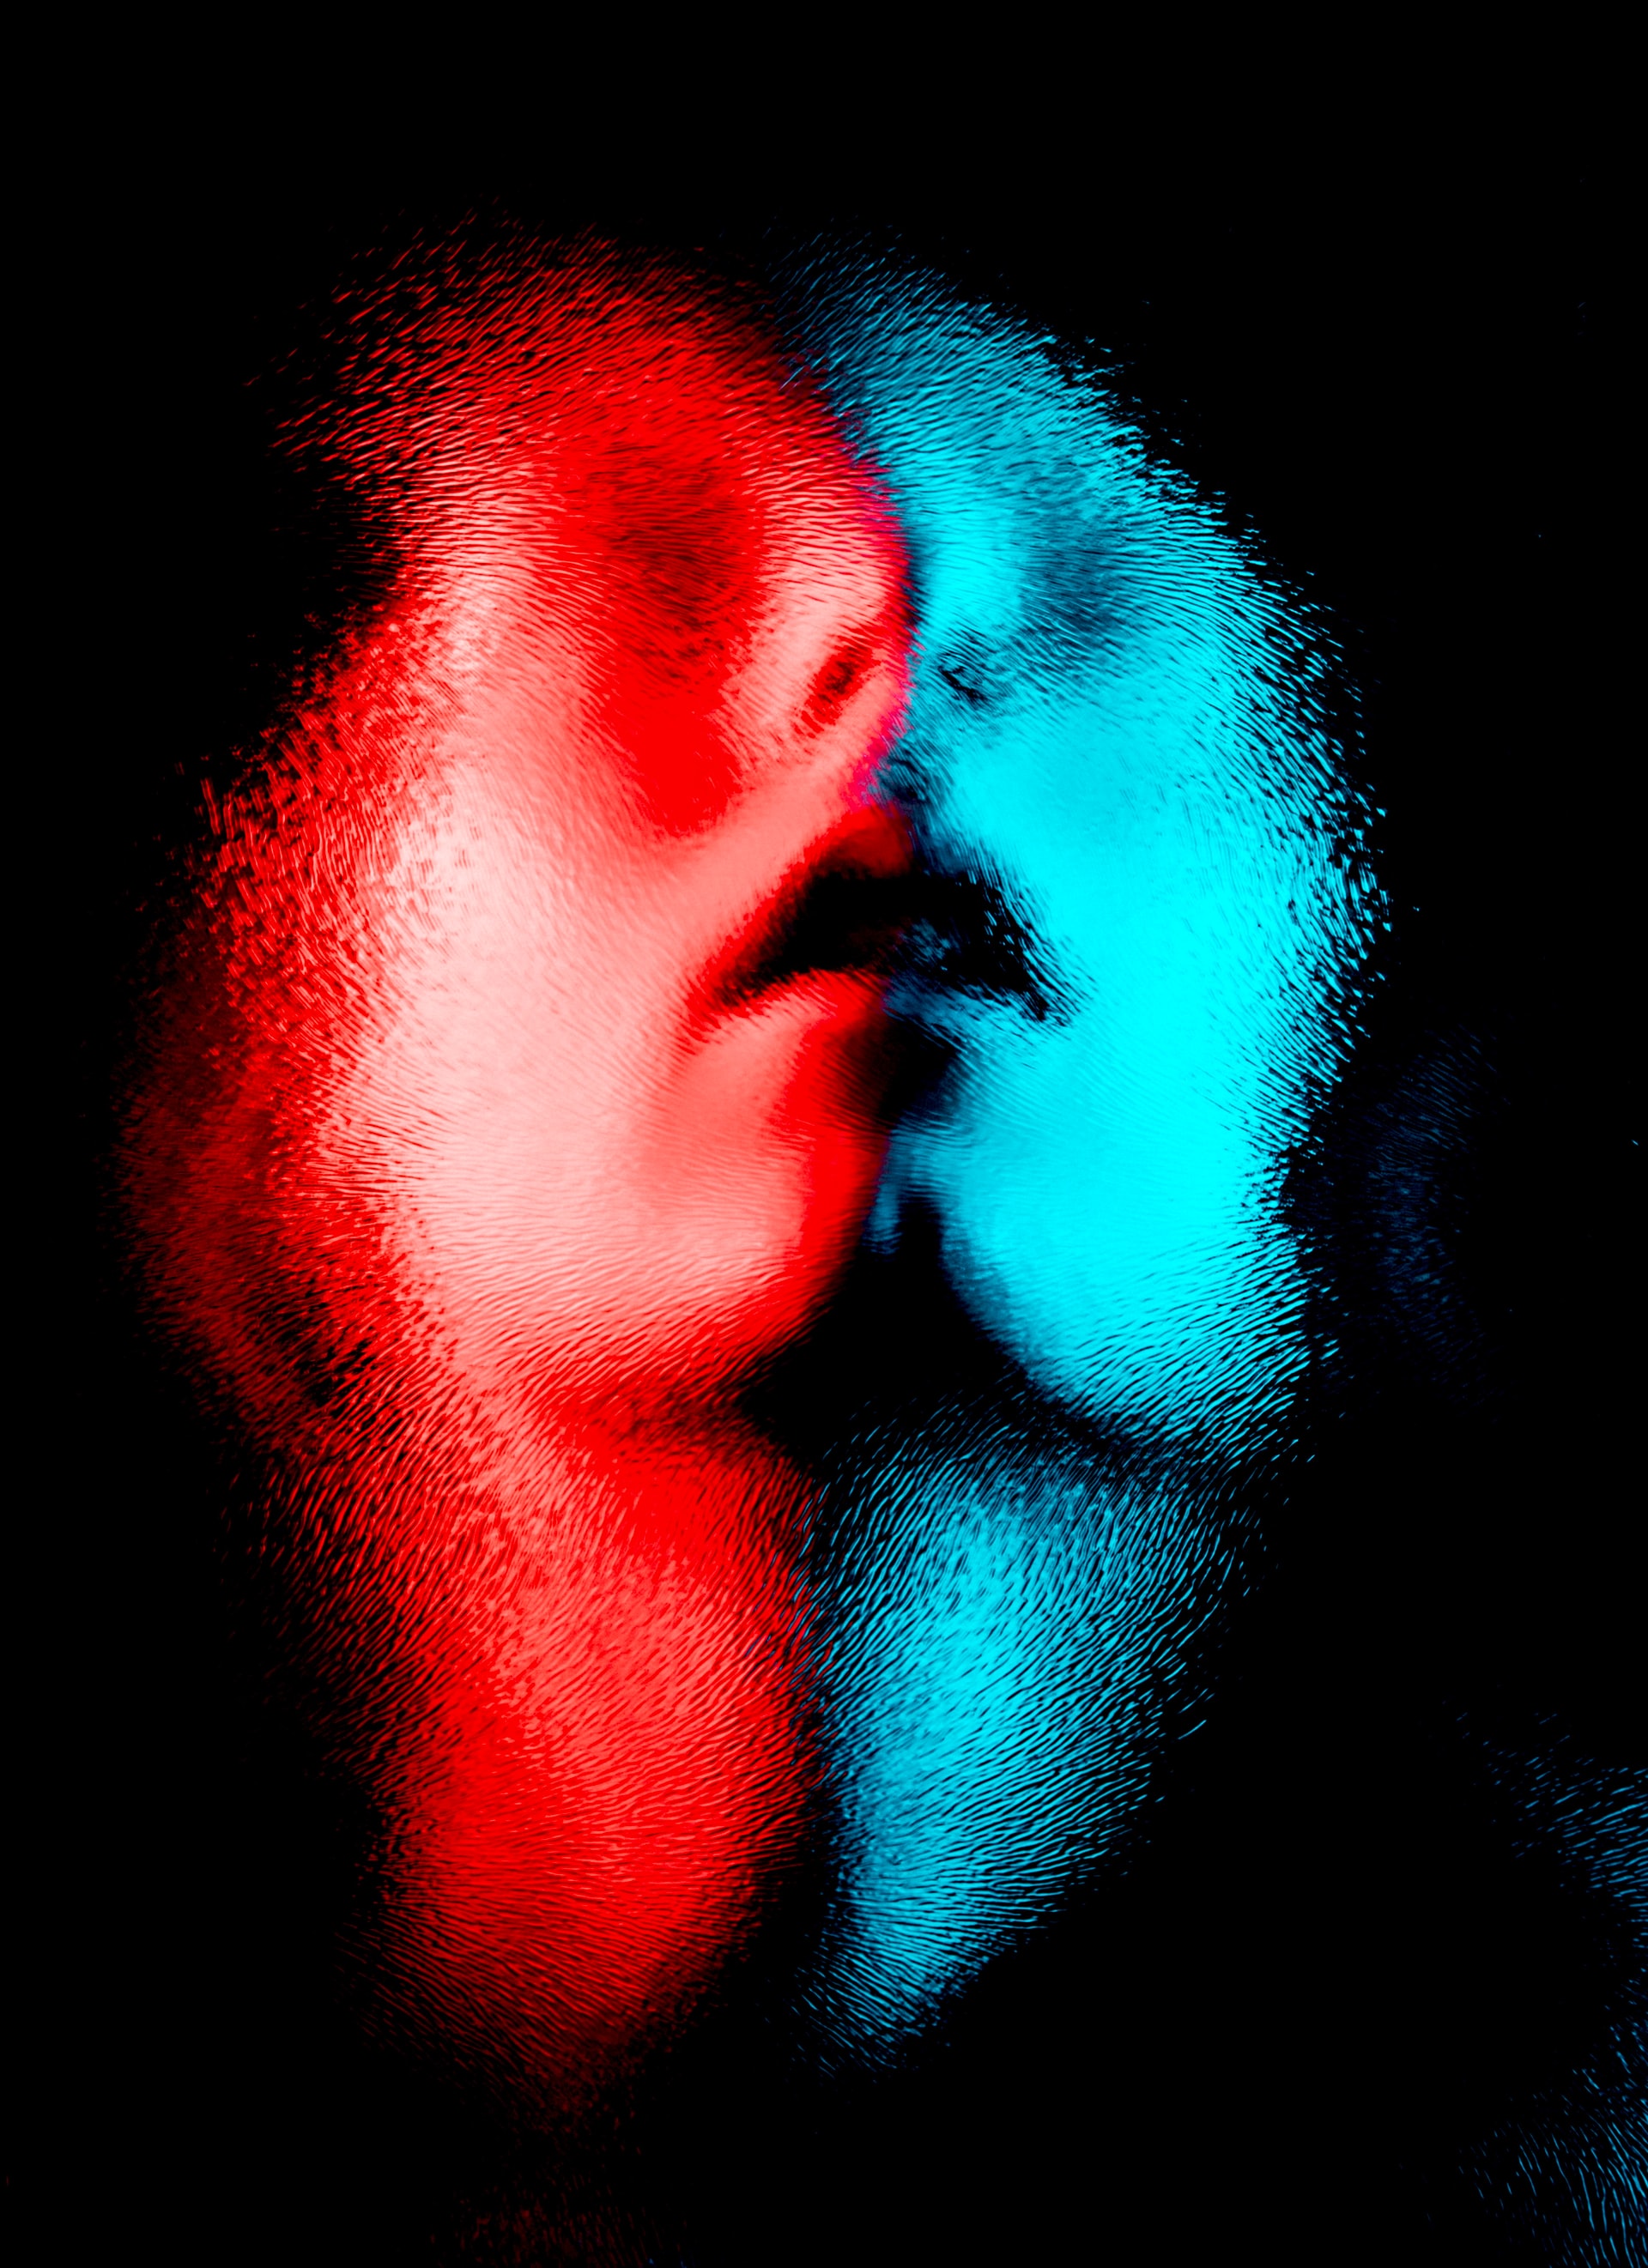 Painting of human face in red and blue color